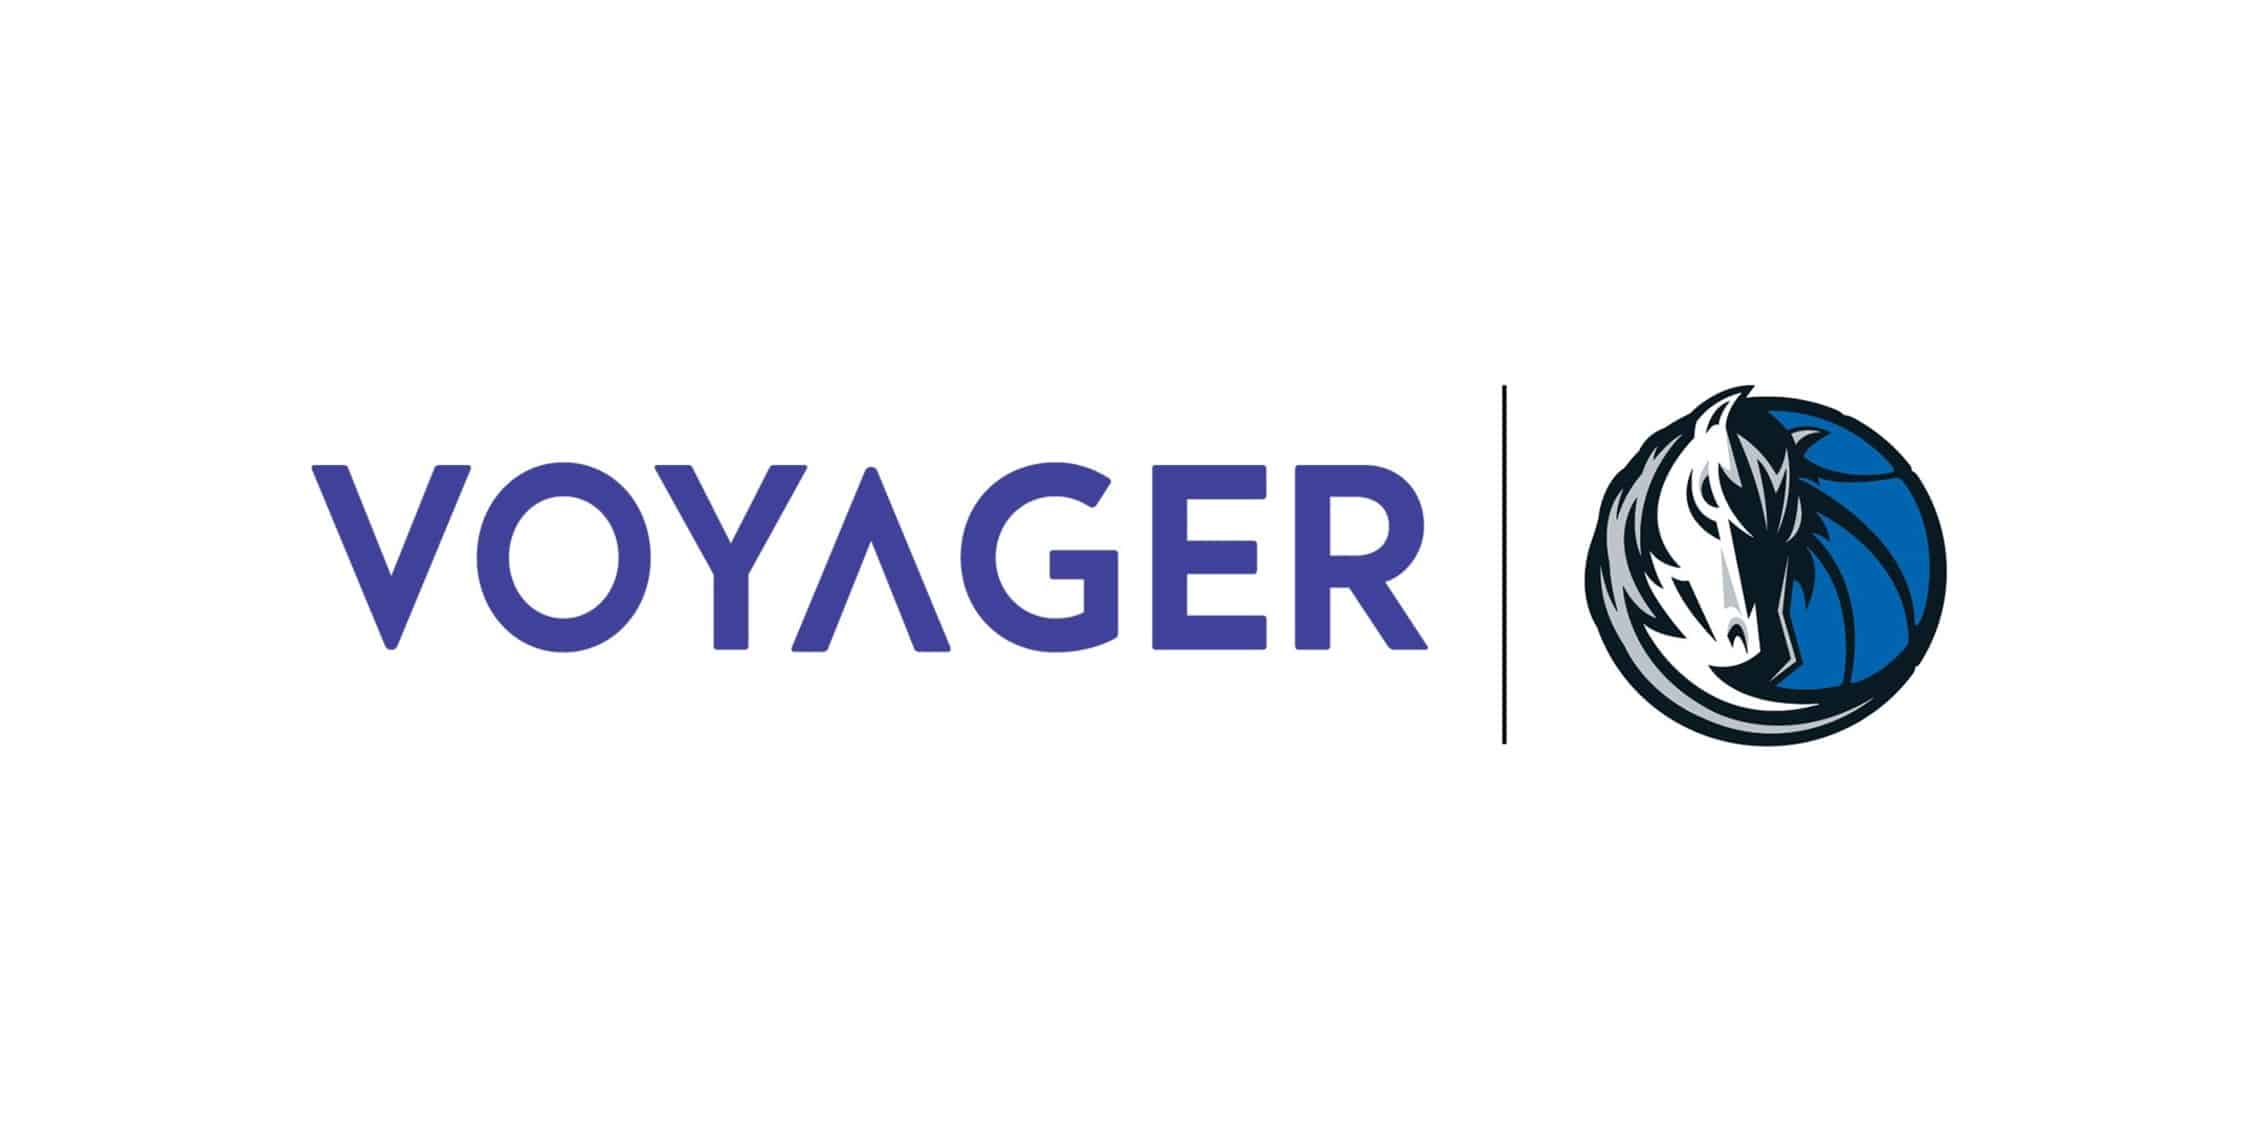 Amid the Crypto Credit Crisis, Voyager Digital Files for Bankruptcy